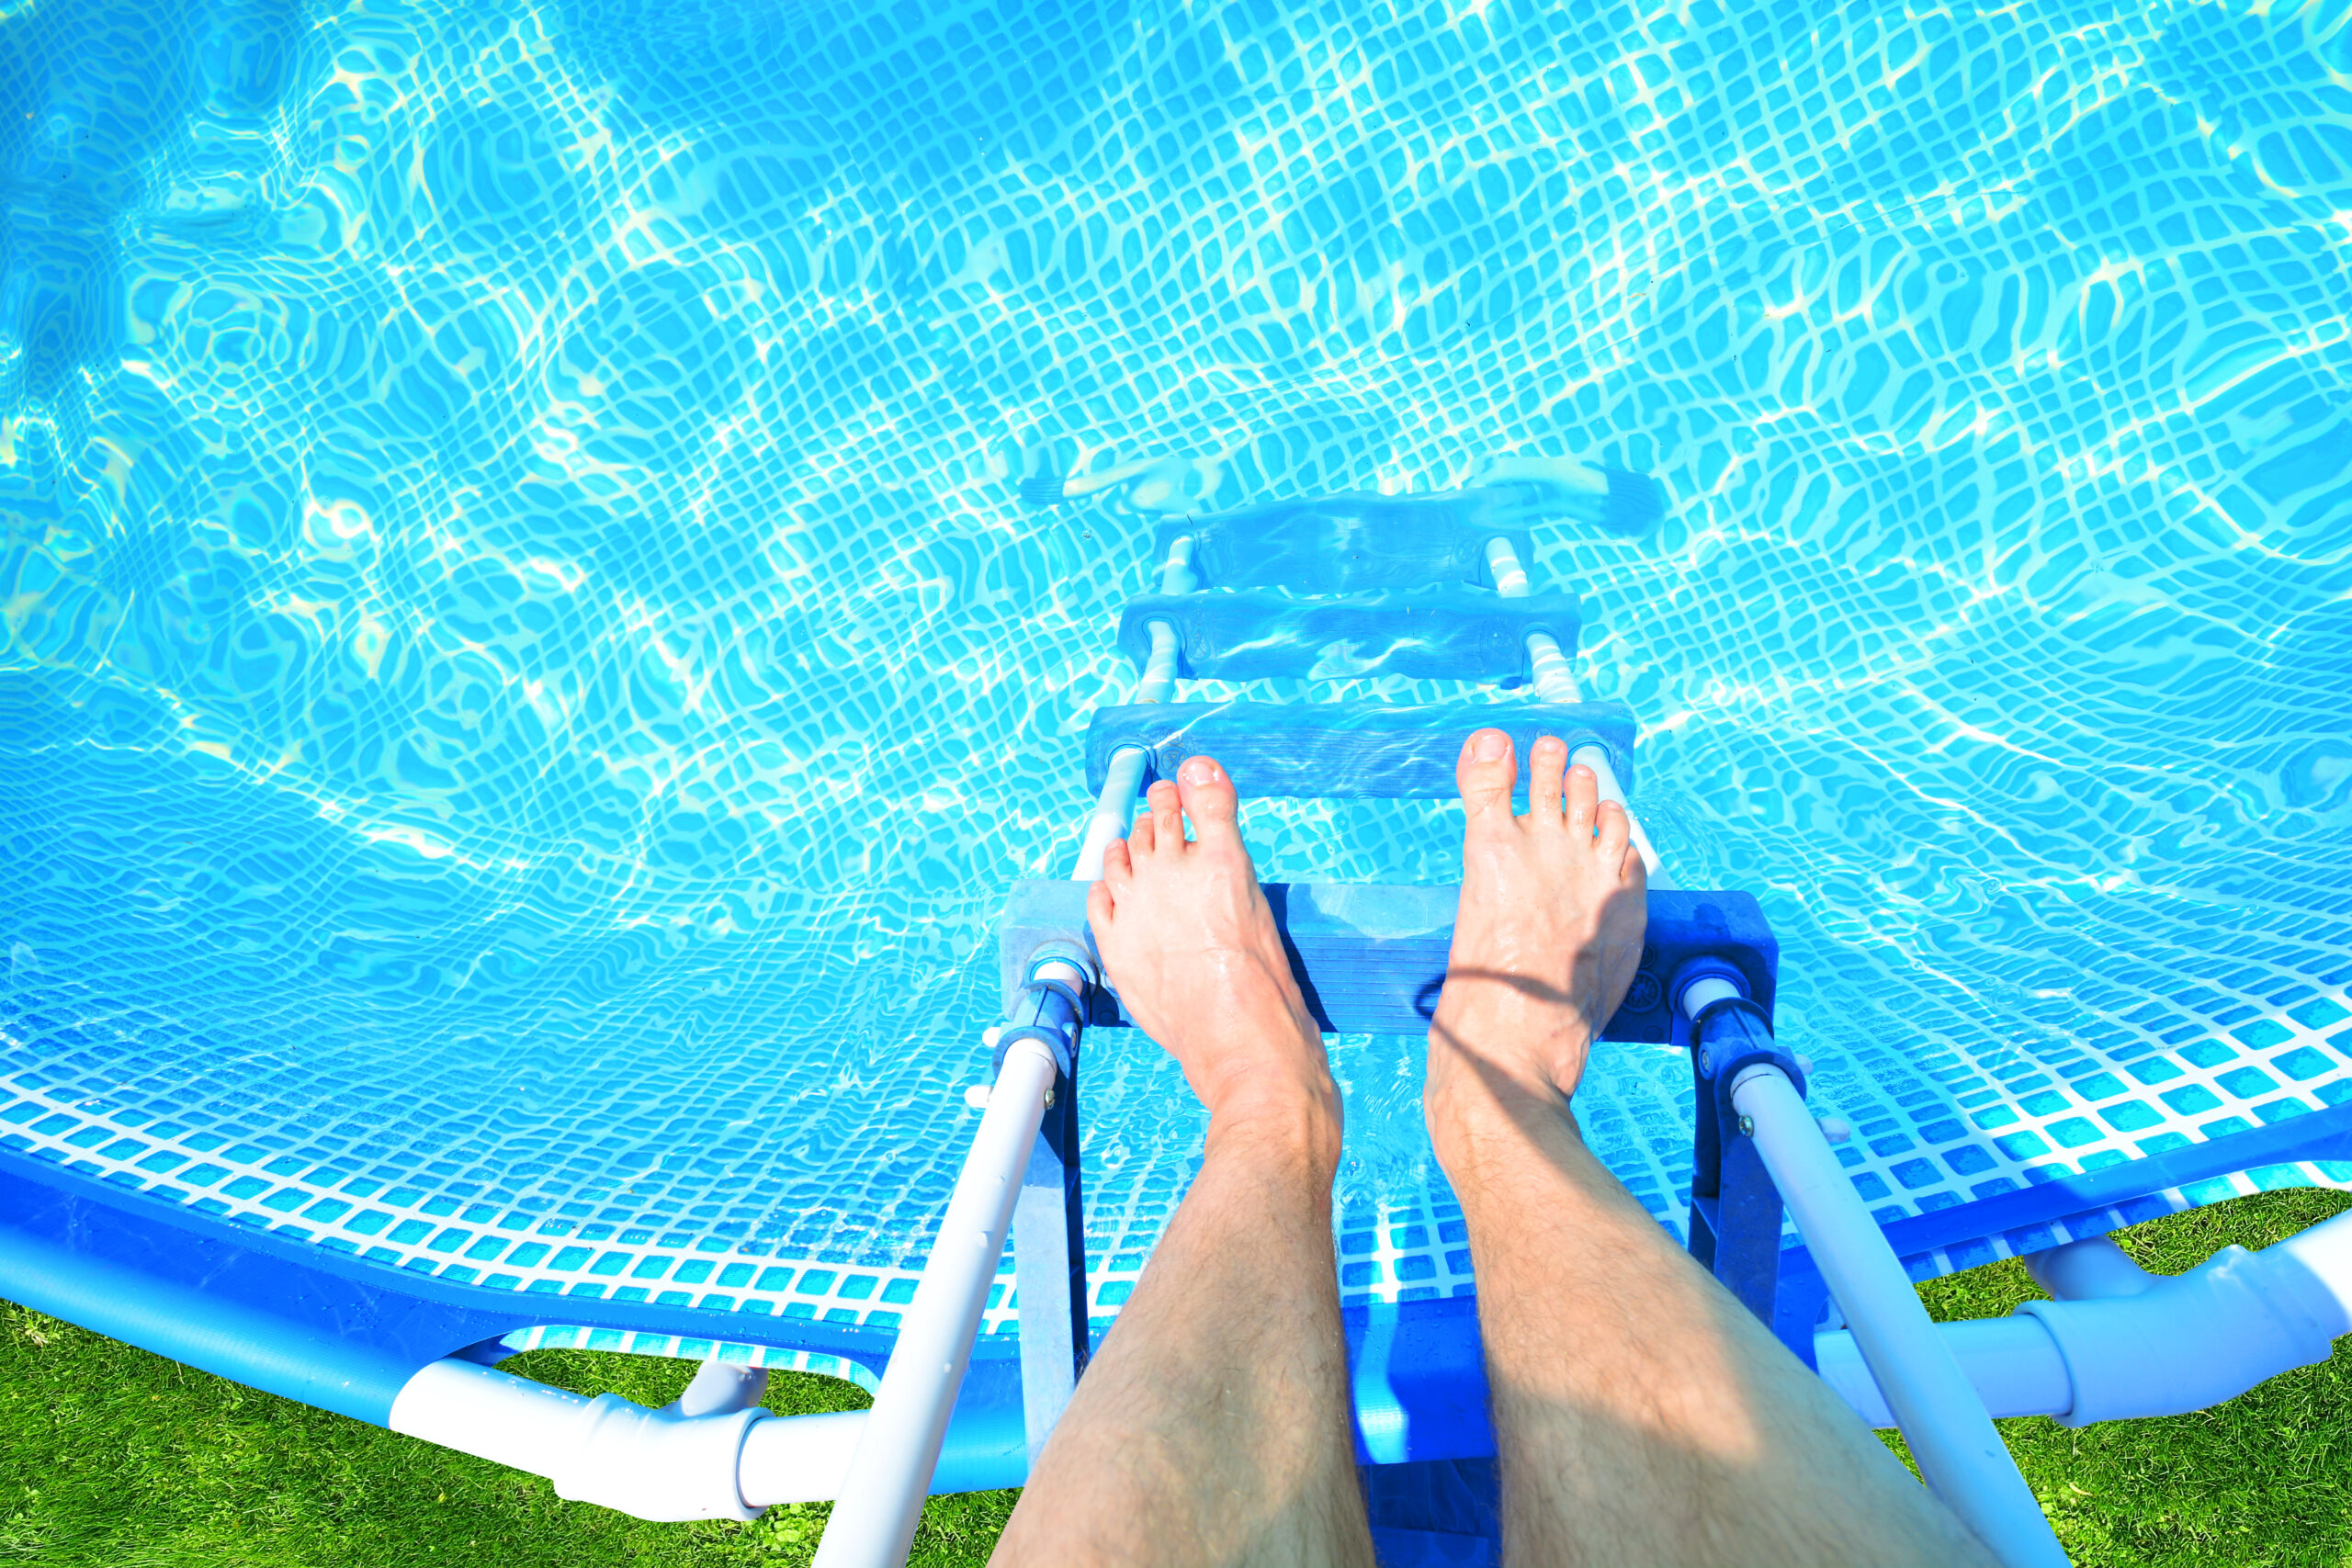 Feet resting on the ladder steps of a swimming pool, ready to climb in of the water for a refreshing swim